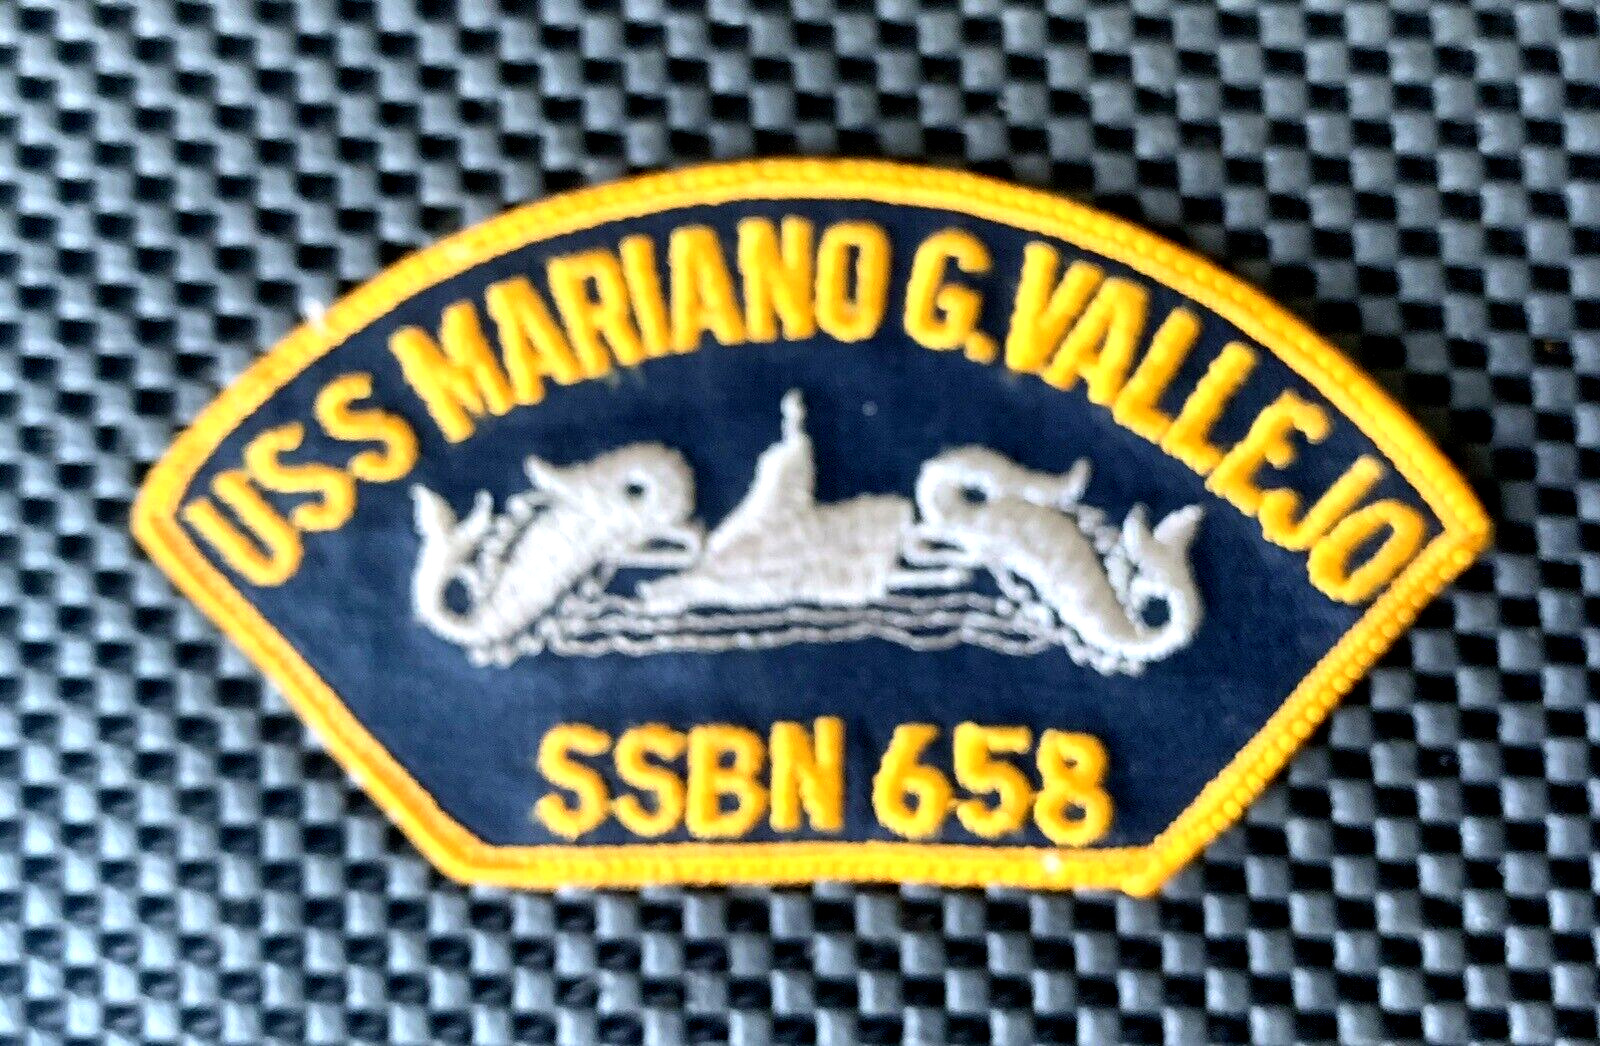 USS MARIANO G. VALLEJO SSBN 658 EMBROIDERED SEW ON PATCH 1966-1995 5 1/2\